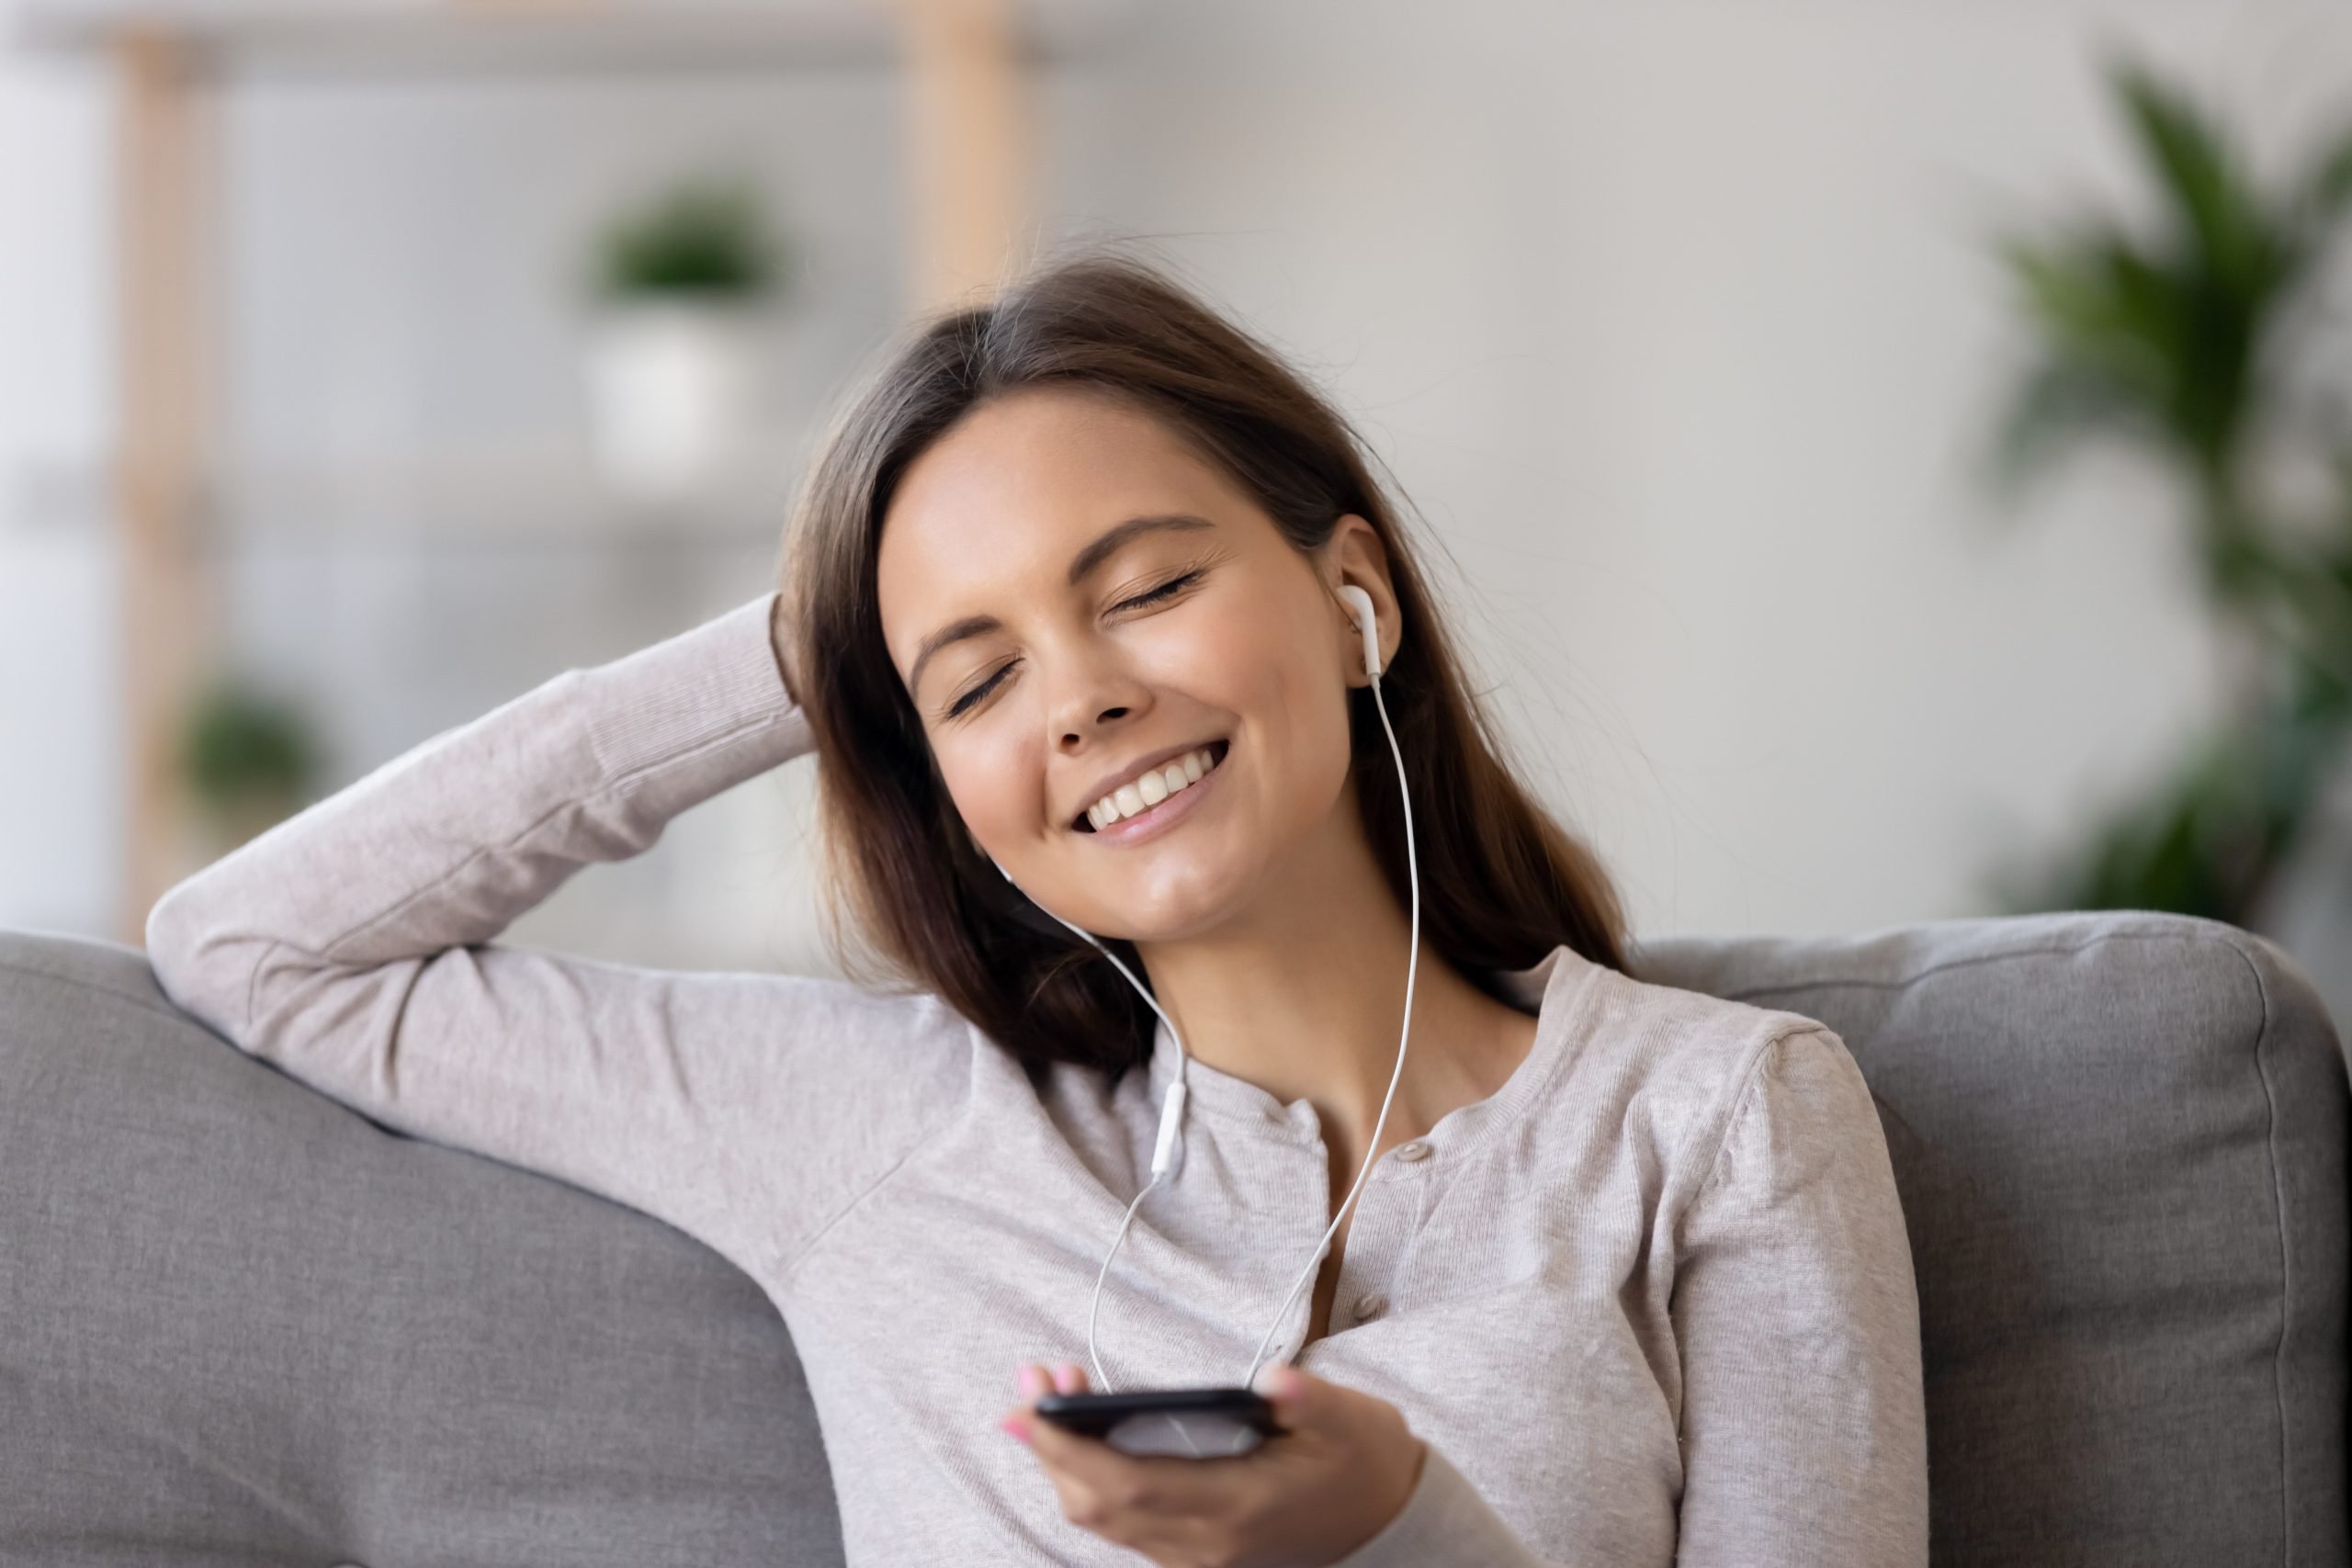 Woman wearing earphones sitting on couch holding phone listening music